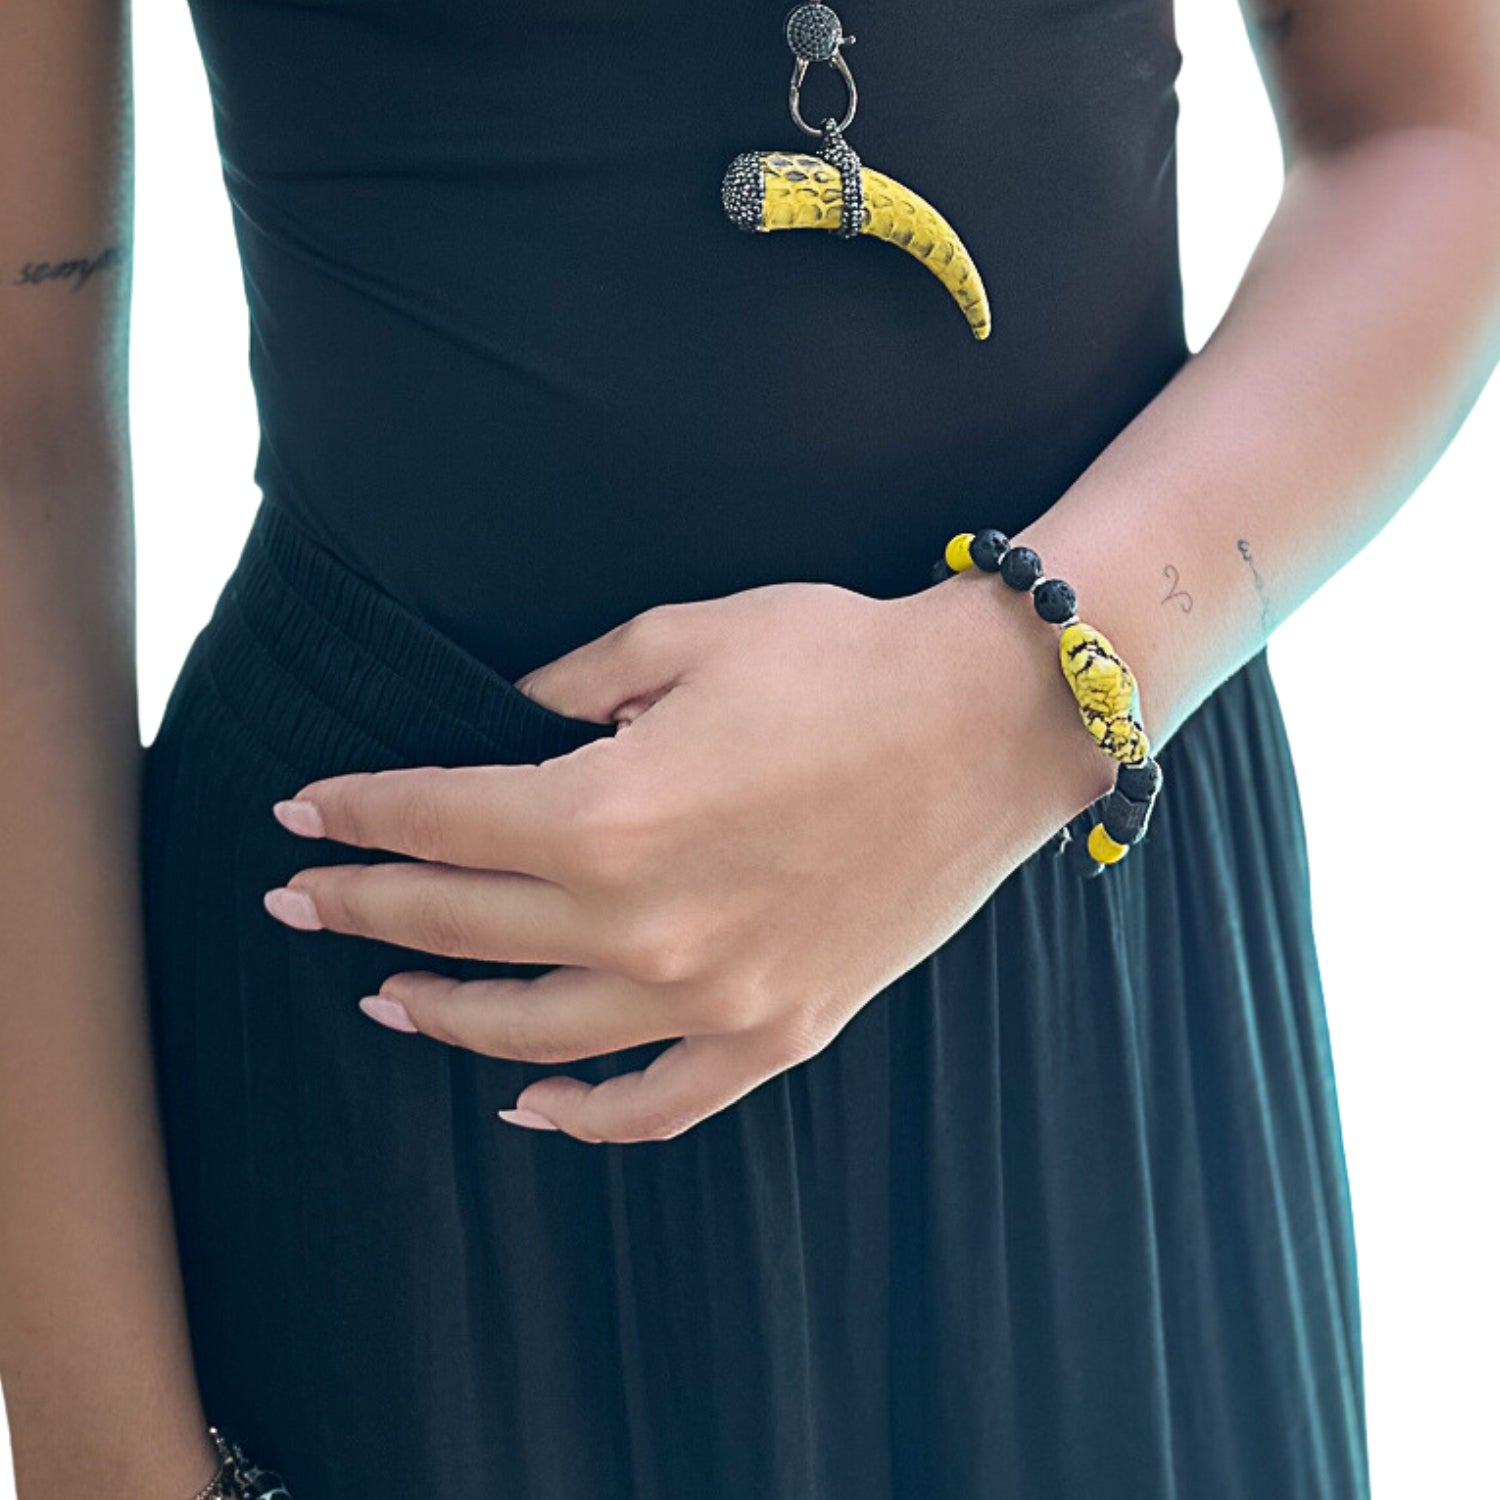 Model wearing the African Yellow Turquoise Bracelet, showcasing its vibrant colors and complementing their style.